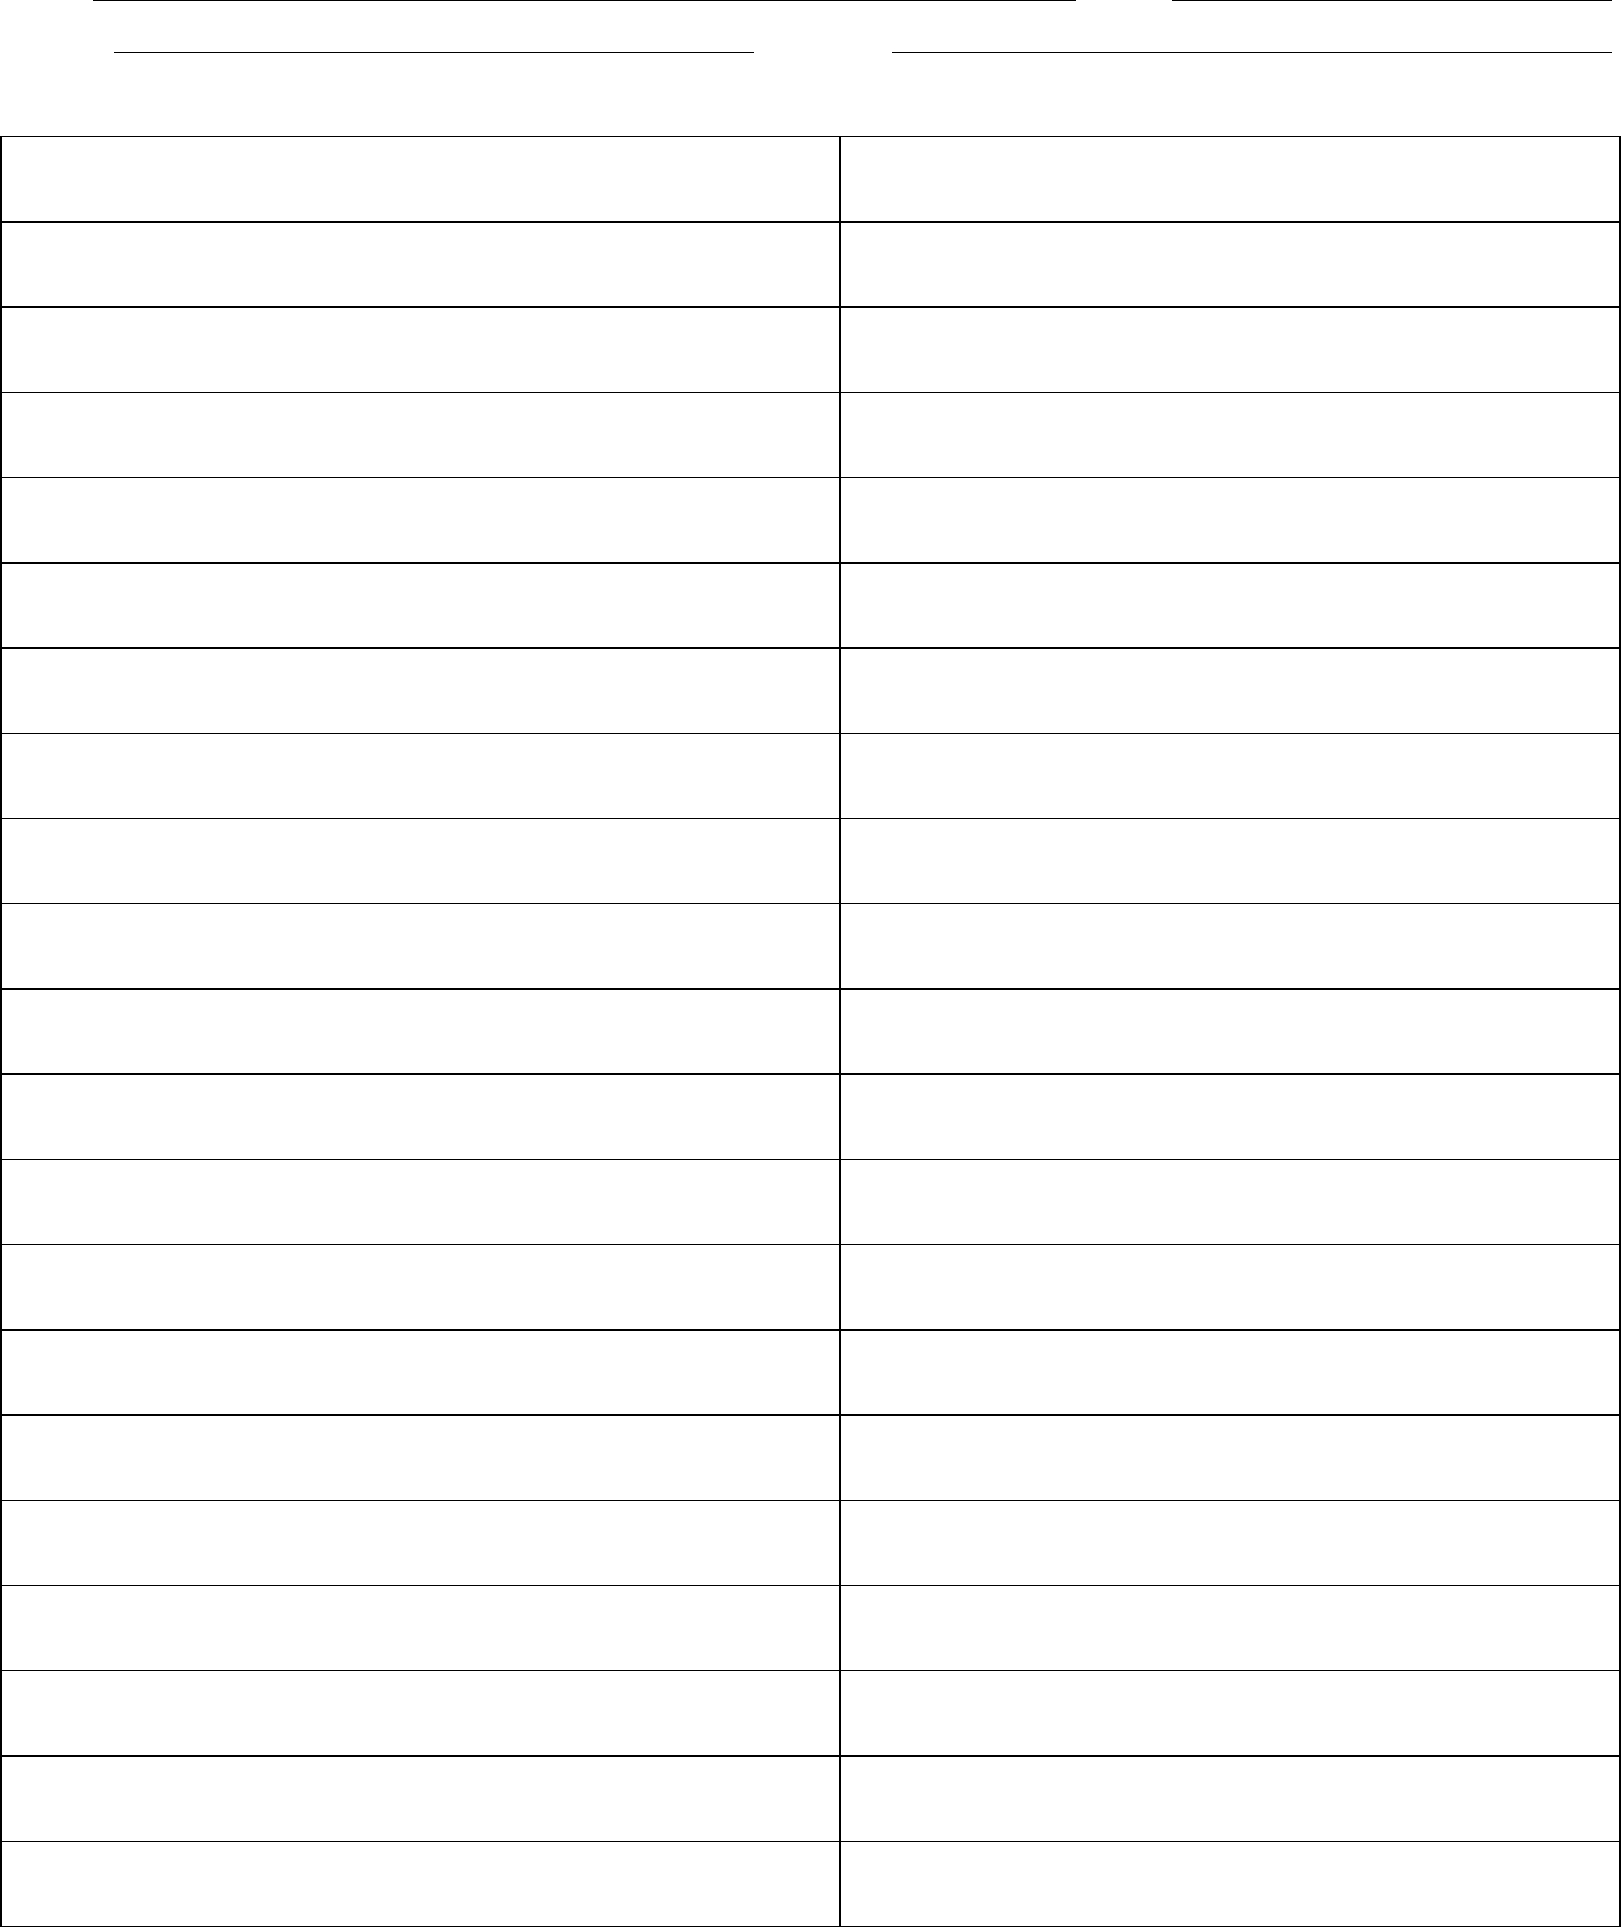 Attendance Form Safety Meeting Sign In Sheet Free Download Regarding Meeting Sign In Sheet Template